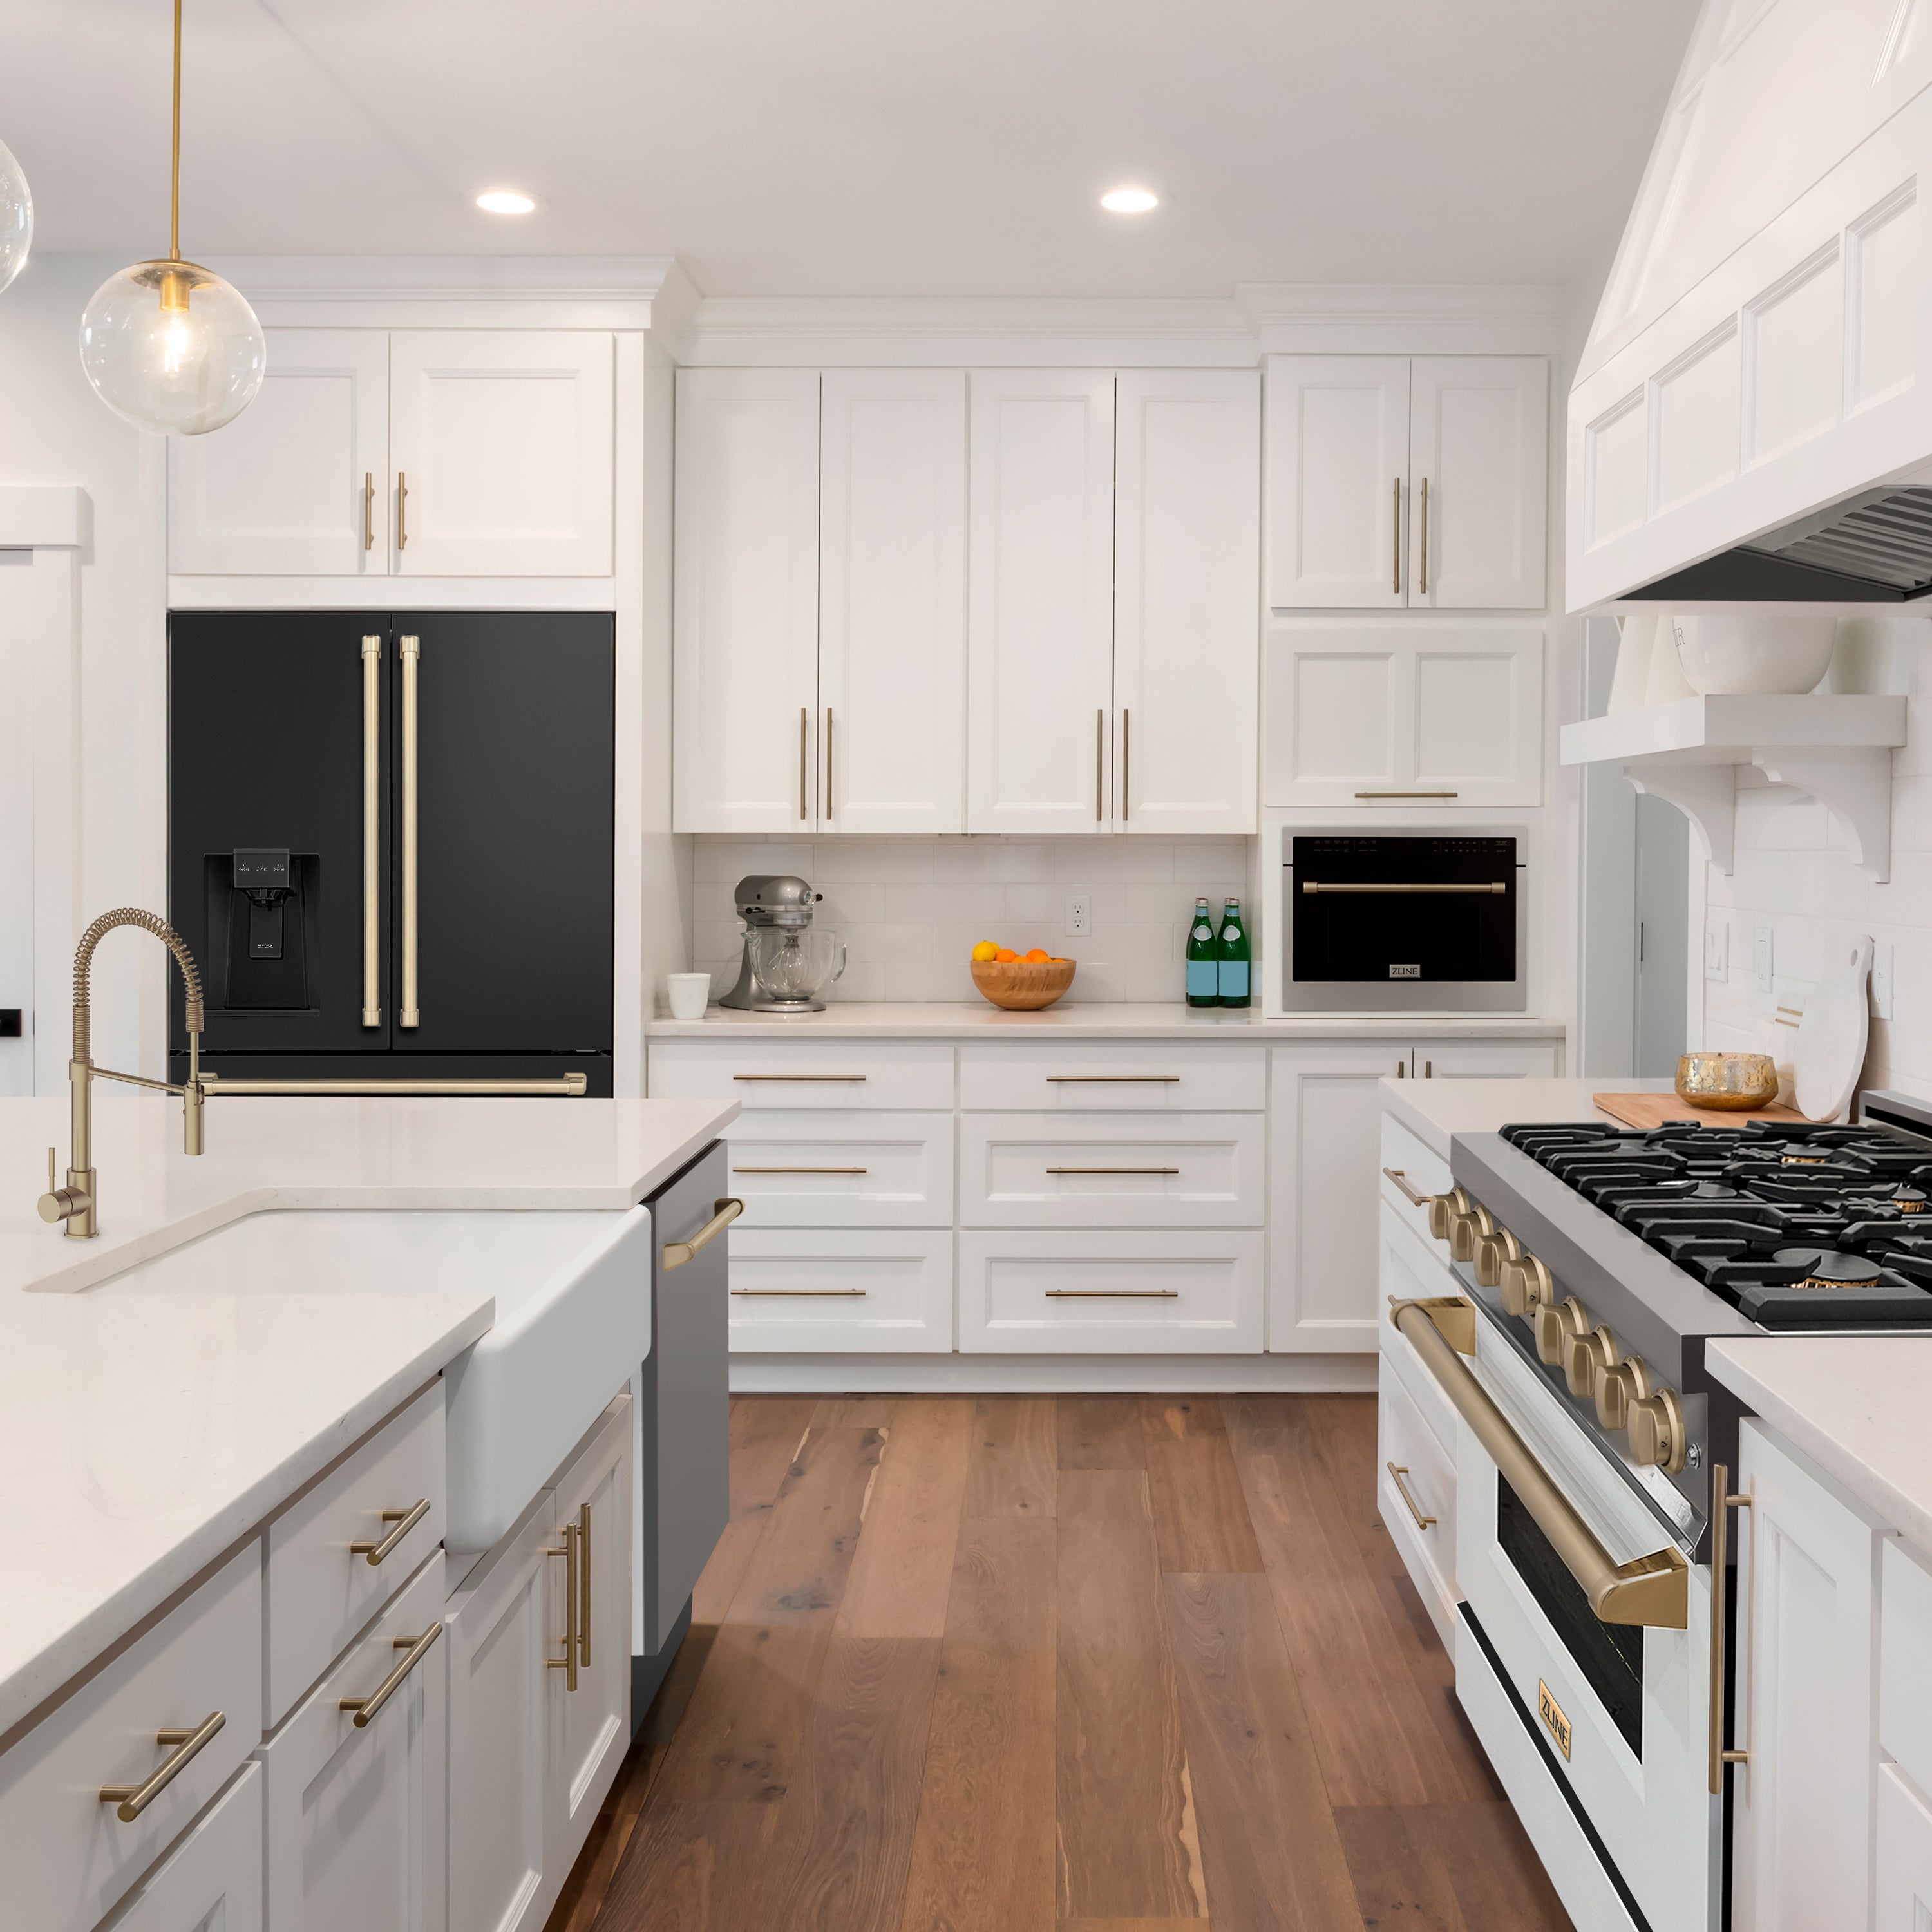 ZLINE appliances with champagne bronze accents in a luxury white farmhouse-style kitchen.